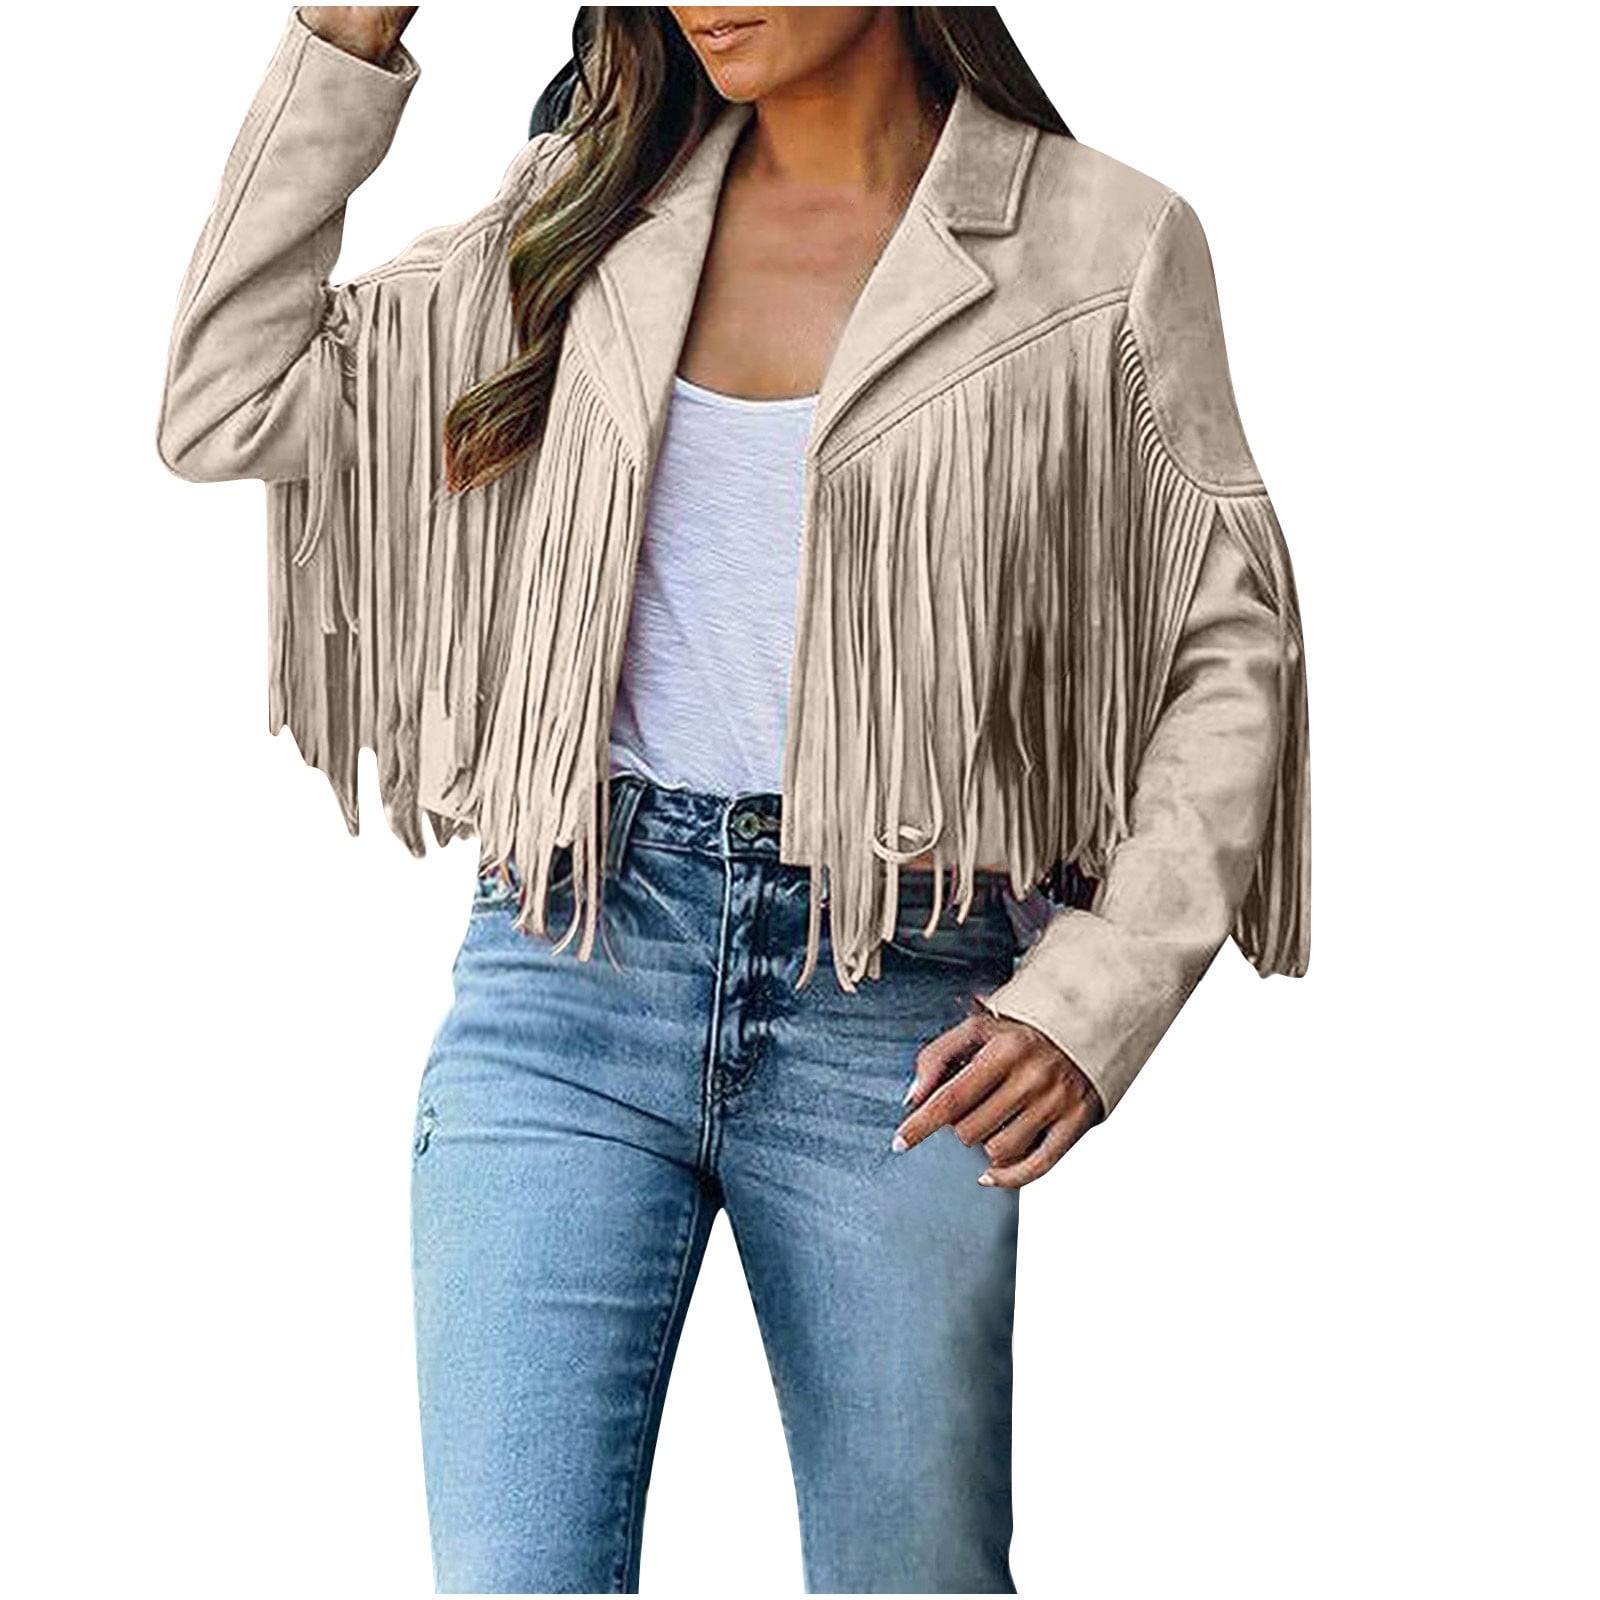 JDEFEG Western Clothes Women Fashion Tops Clothes Casual Turn Collar  Corduroy Jacket Elegant Long Sleeves Tassels Single Short Coat with Sleeves  Polyester Yellow S 